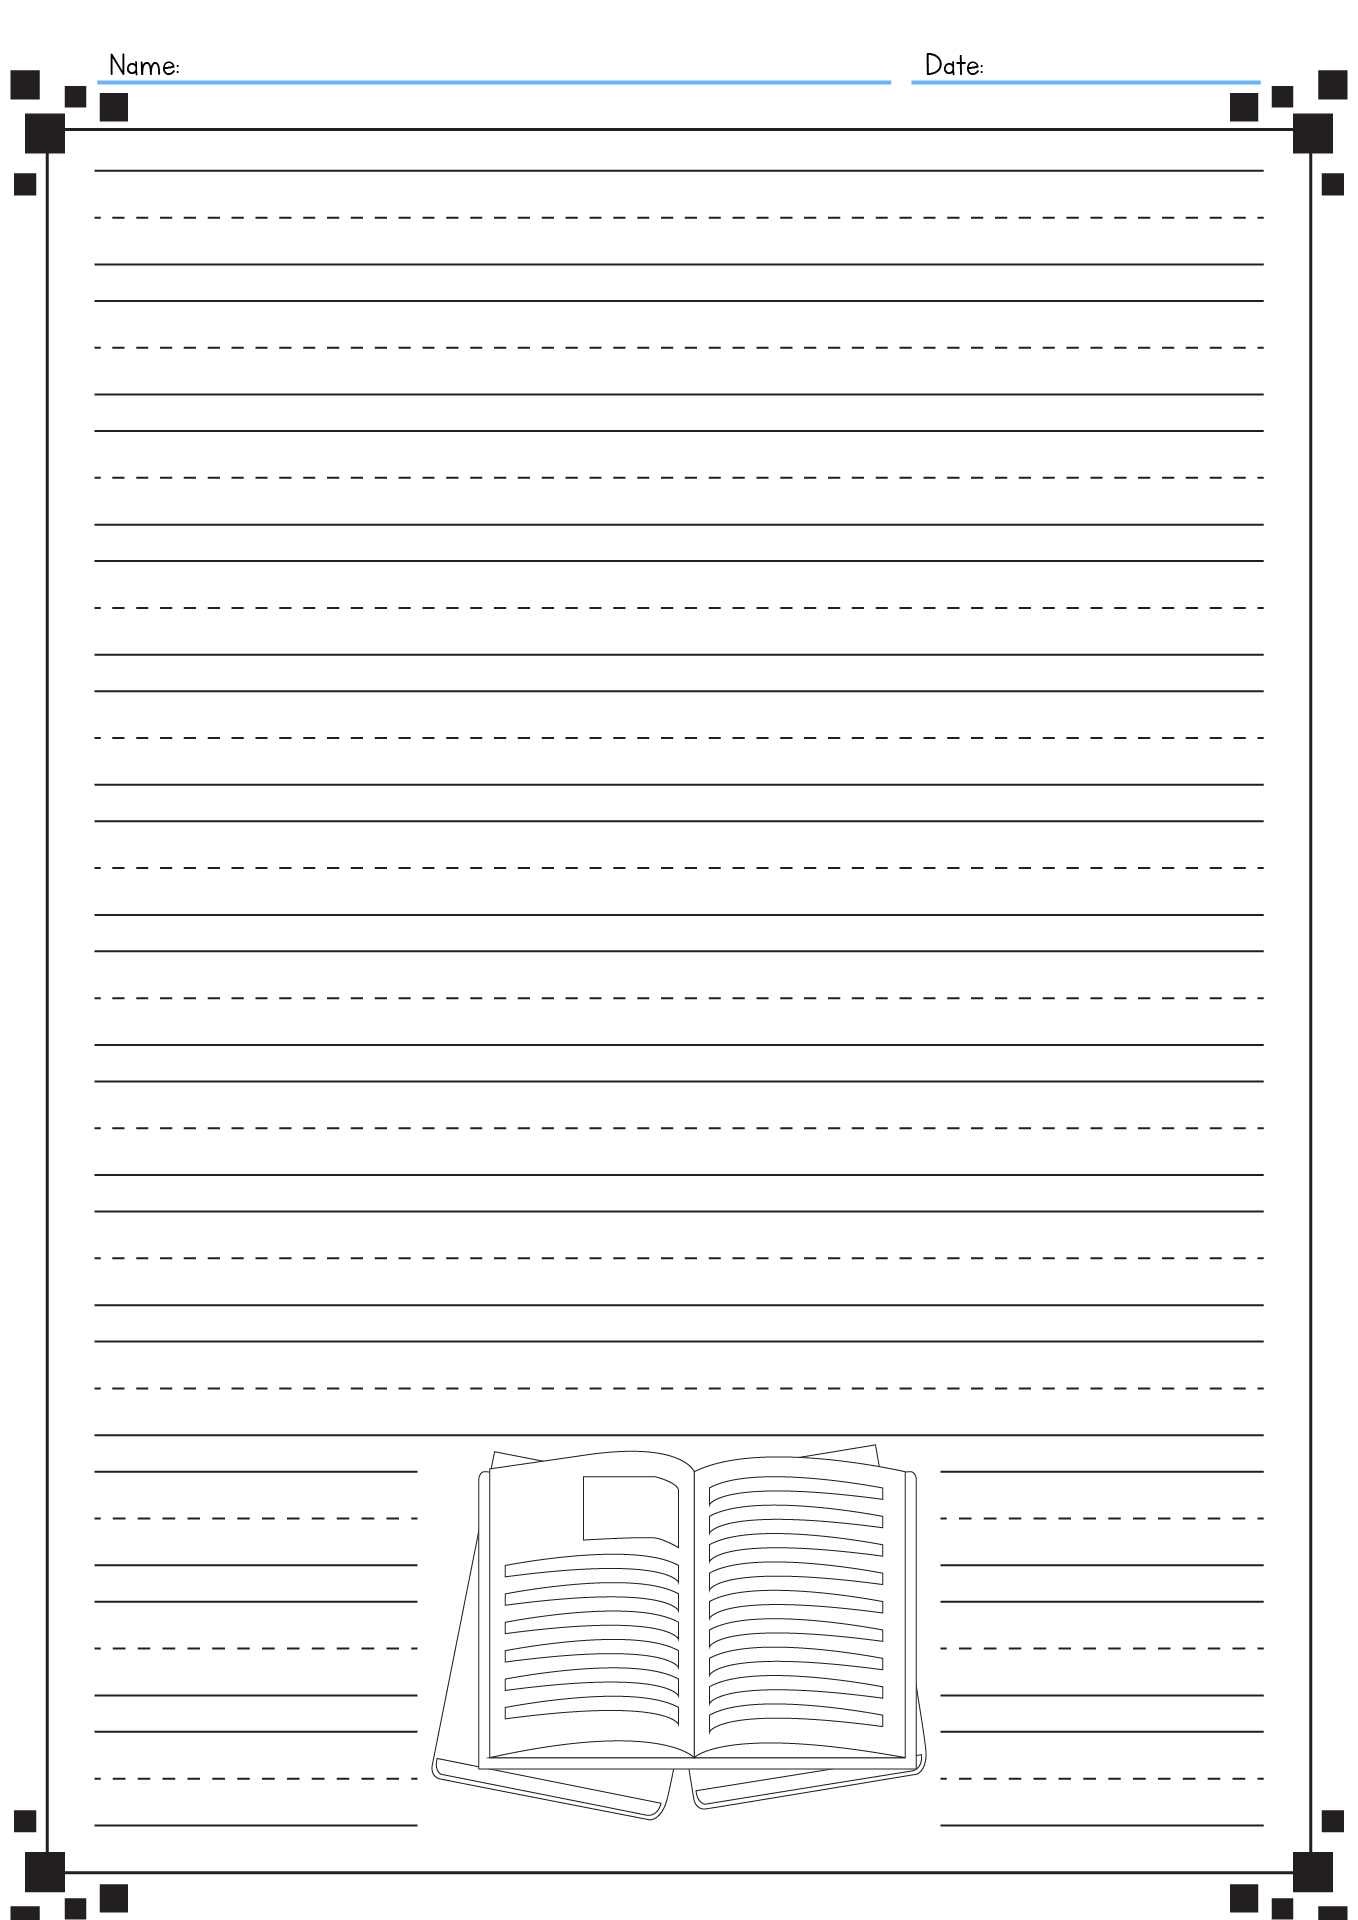 15 Best Images Of Long Lined Paper Worksheets 4th Grade Essay Writing